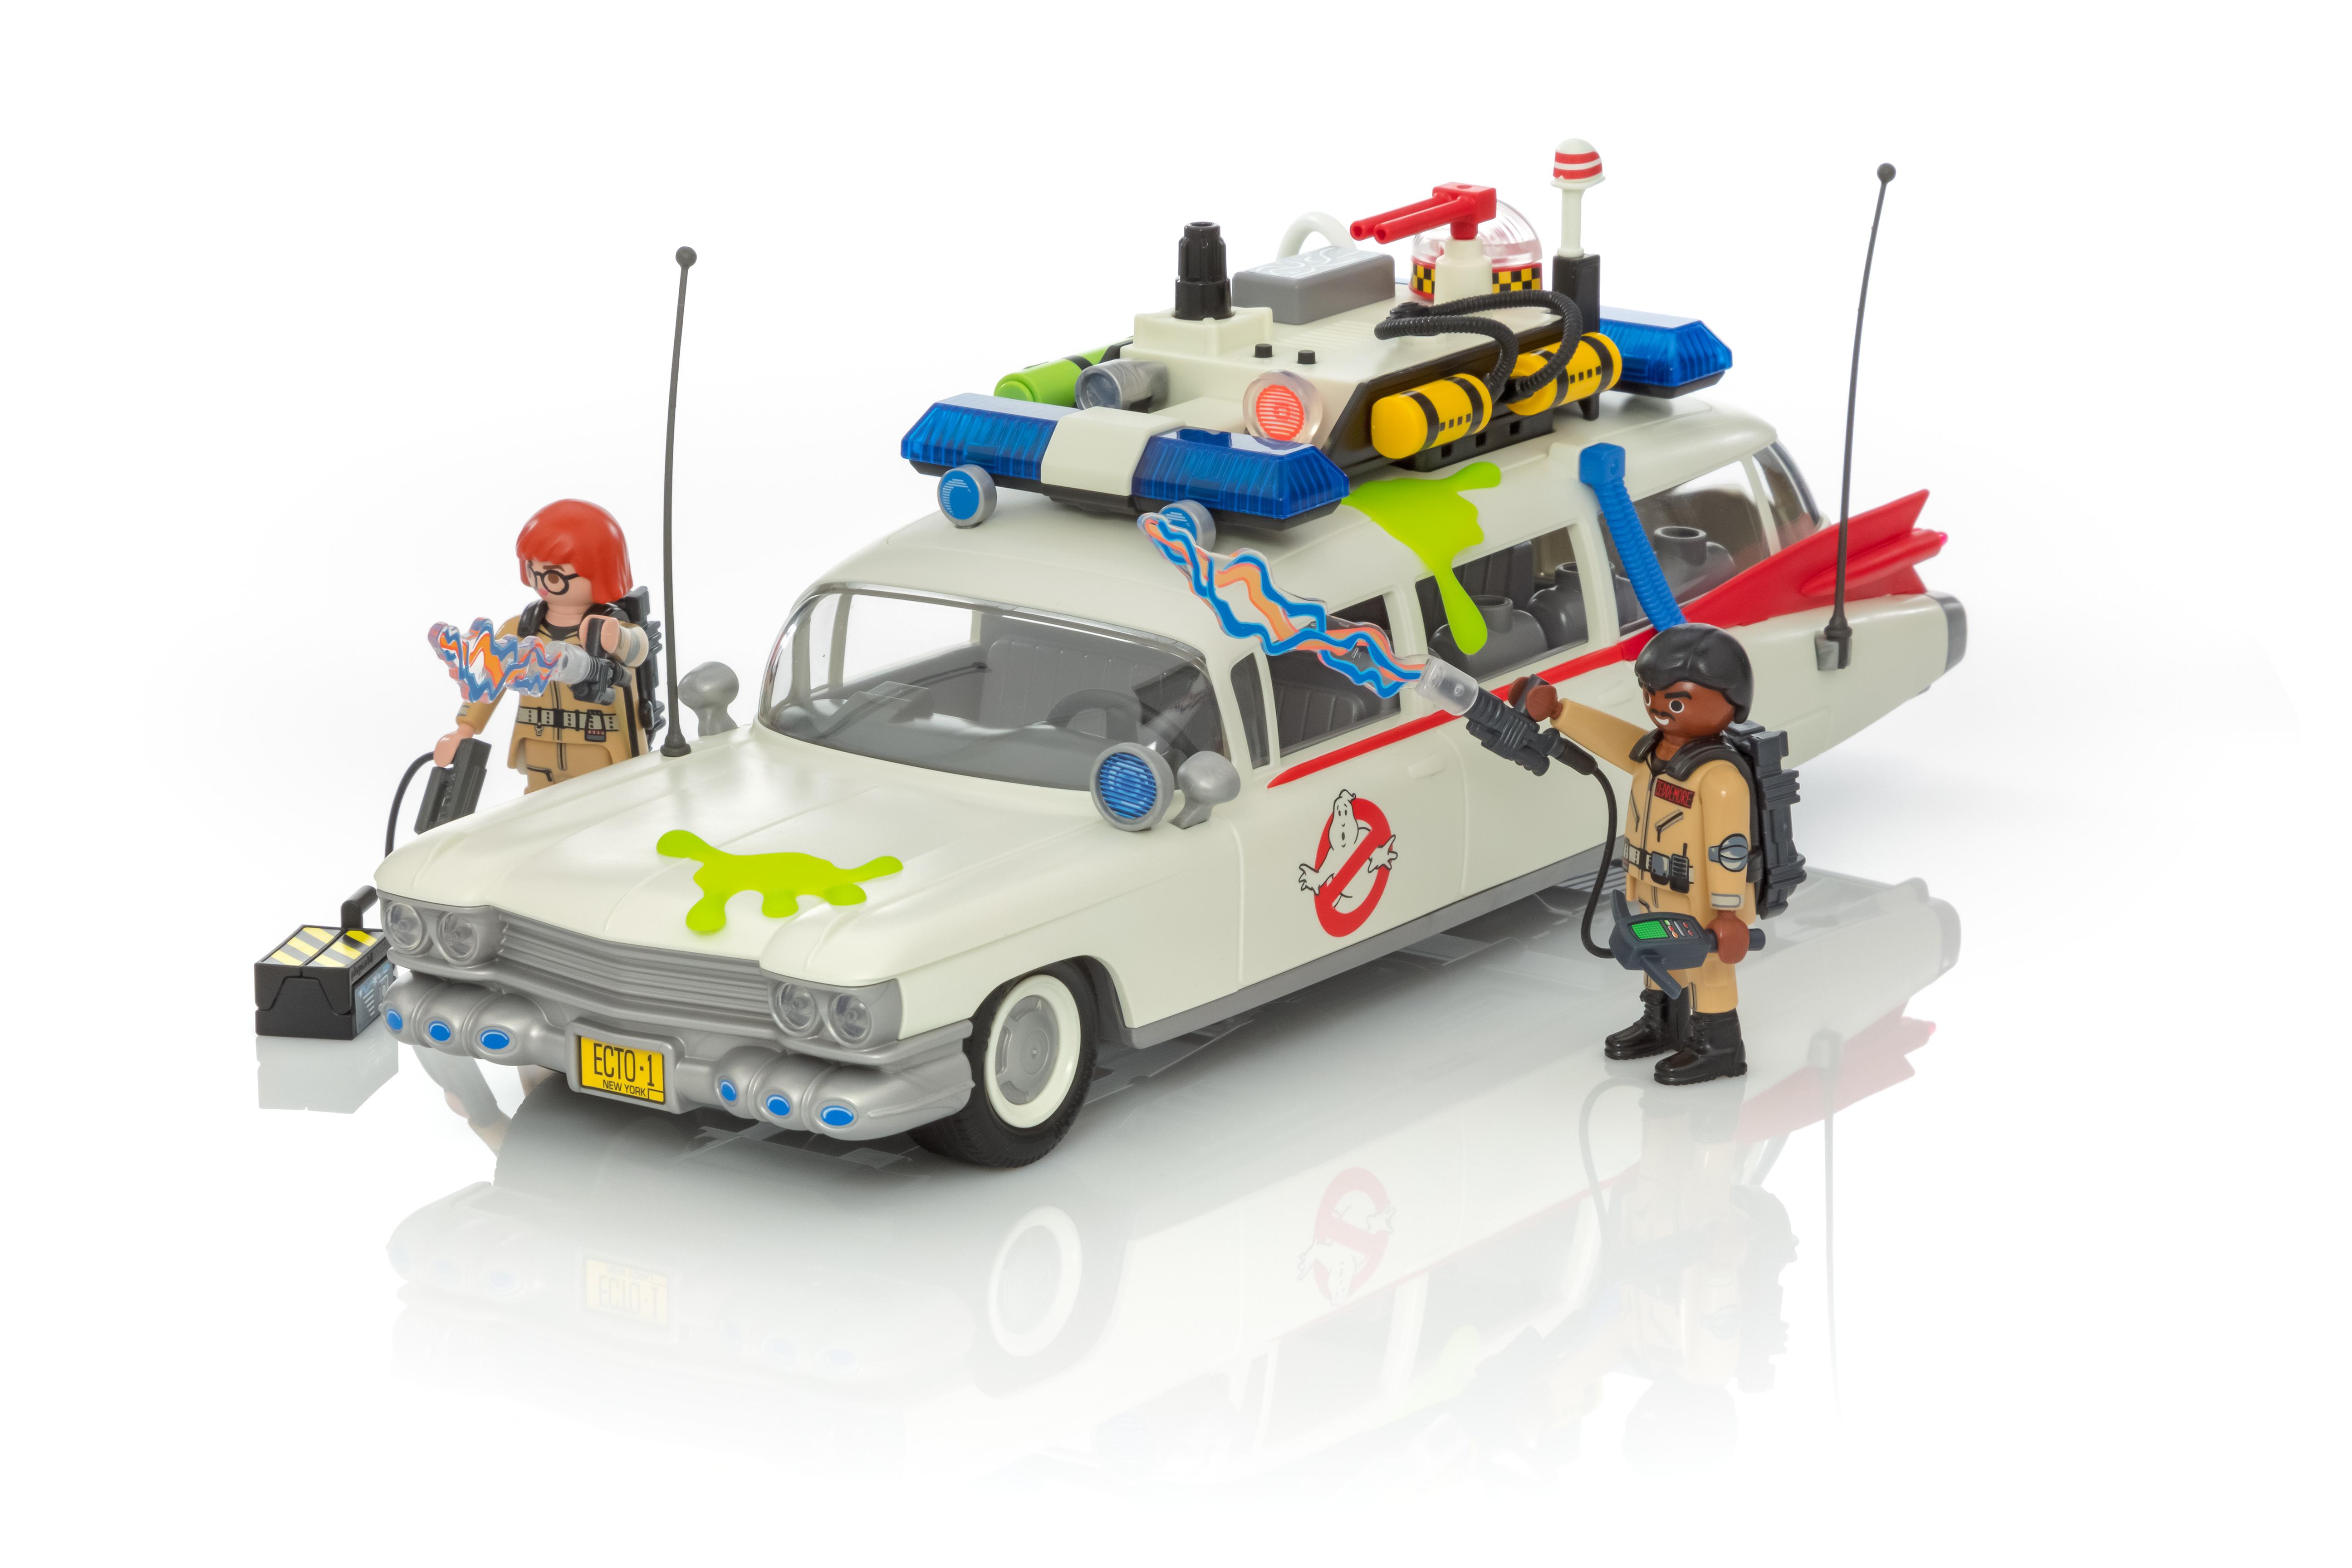 playmobil 9220 ghostbusters ecto 1